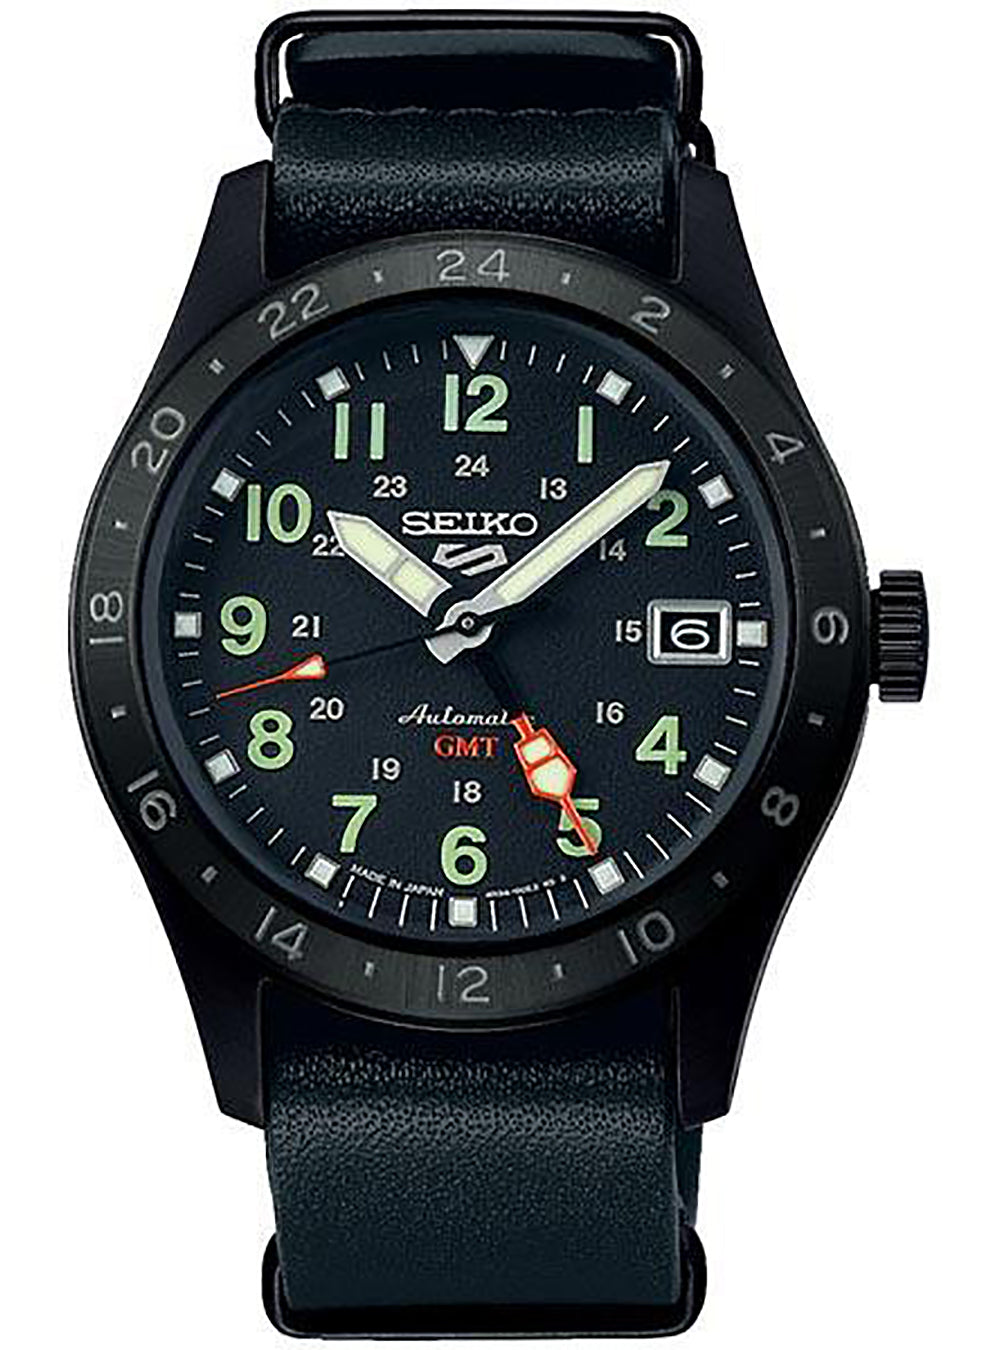 The Seiko 5 Sports Field Is Reborn as the Newest Affordable GMT -  Revolution Watch